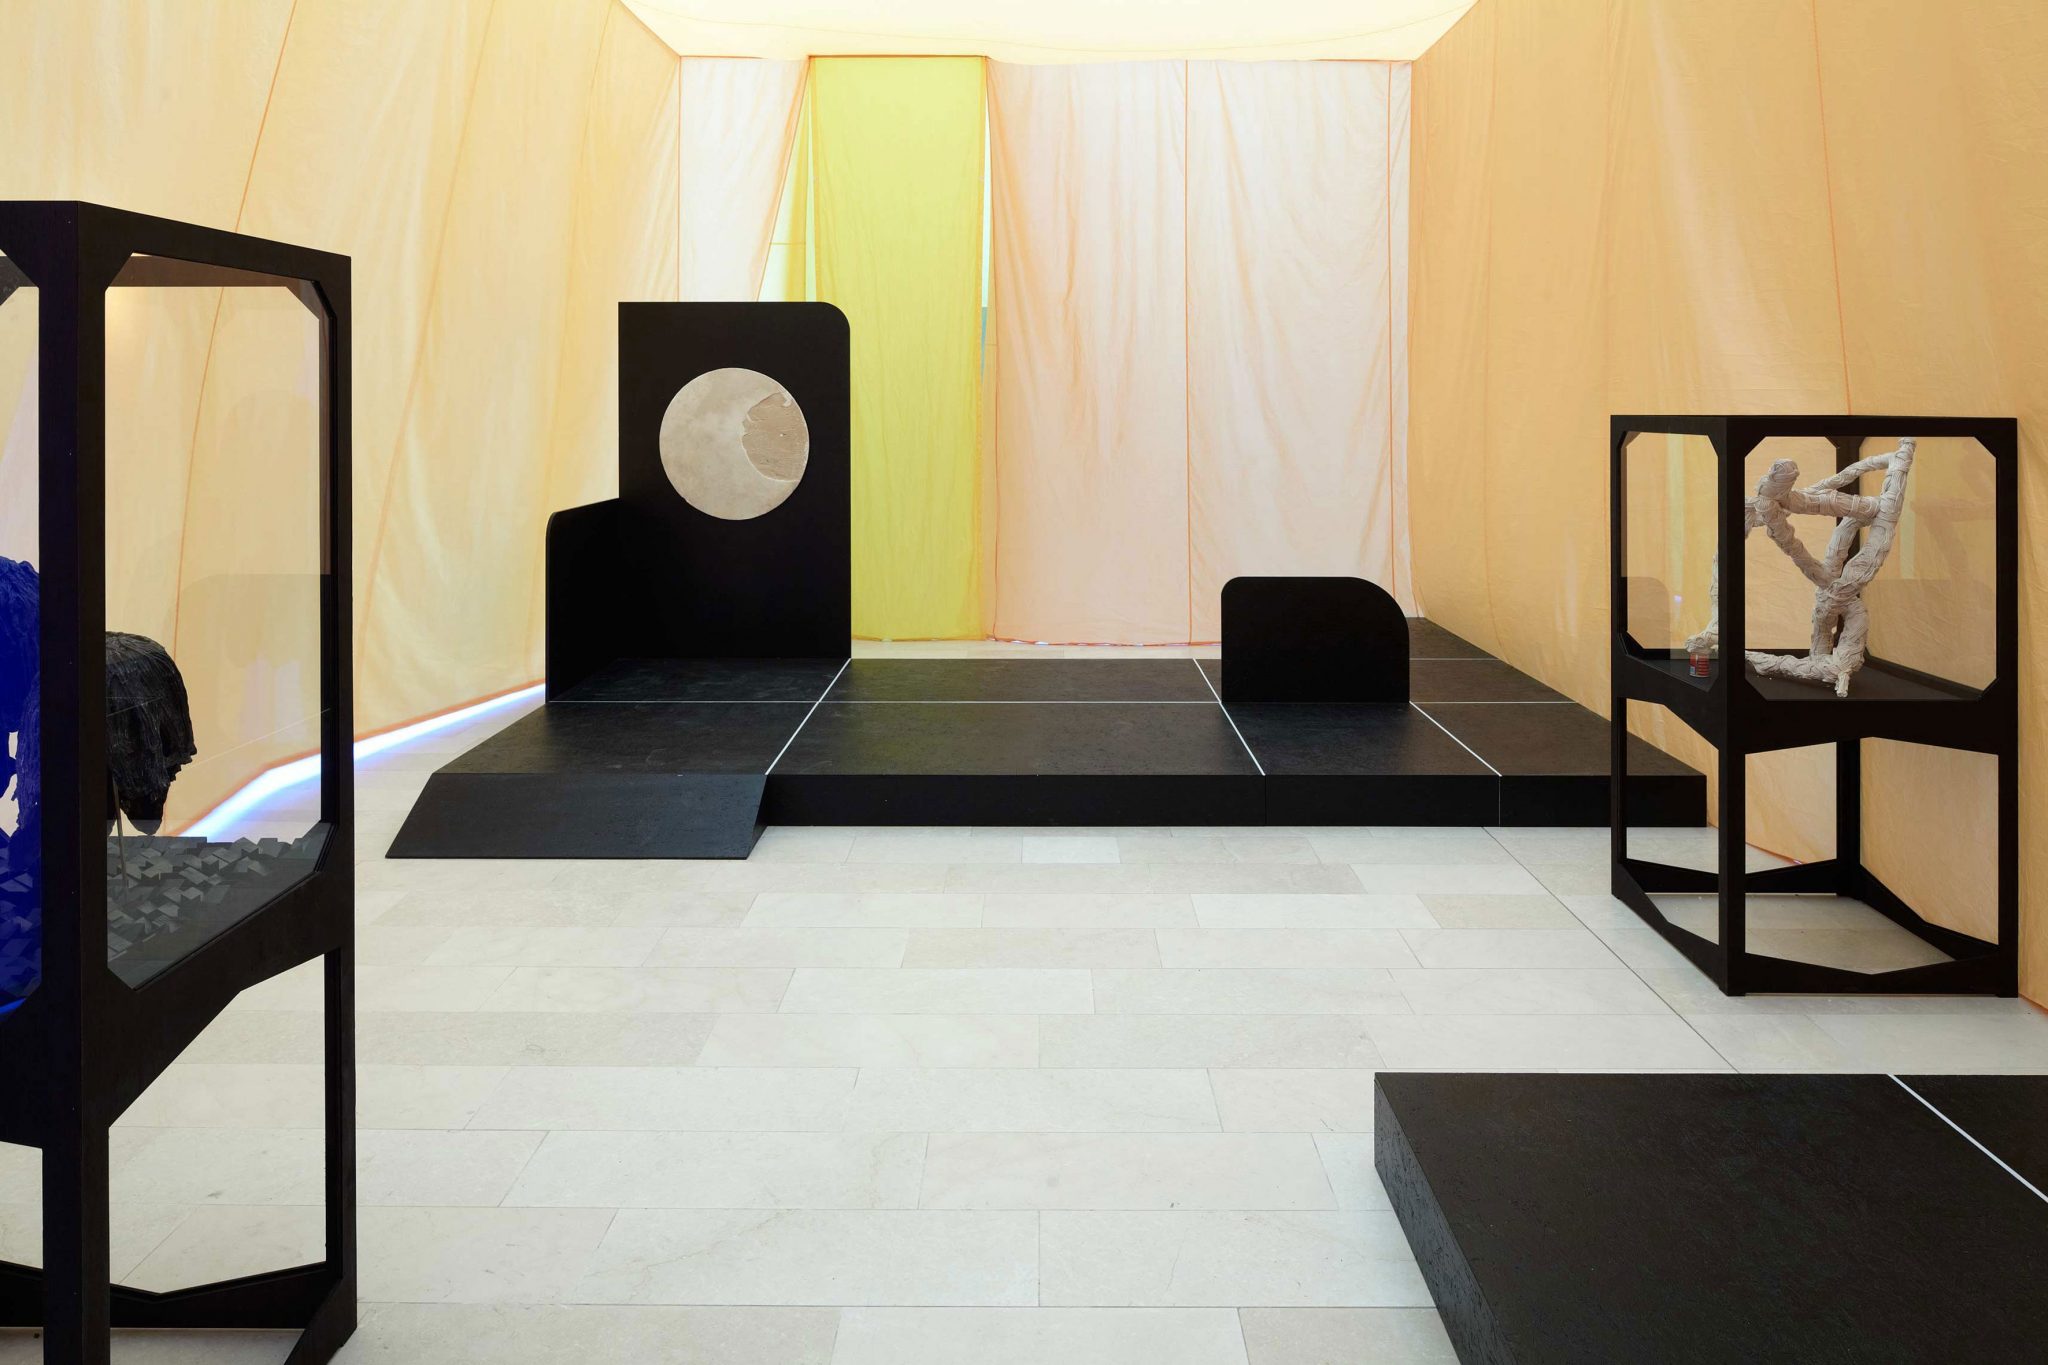 One Language Traveller, 2011 (installation view, Statens Museum for Kunst) photo: Anders Sune Berg, courtesy Max Wigram Gallery